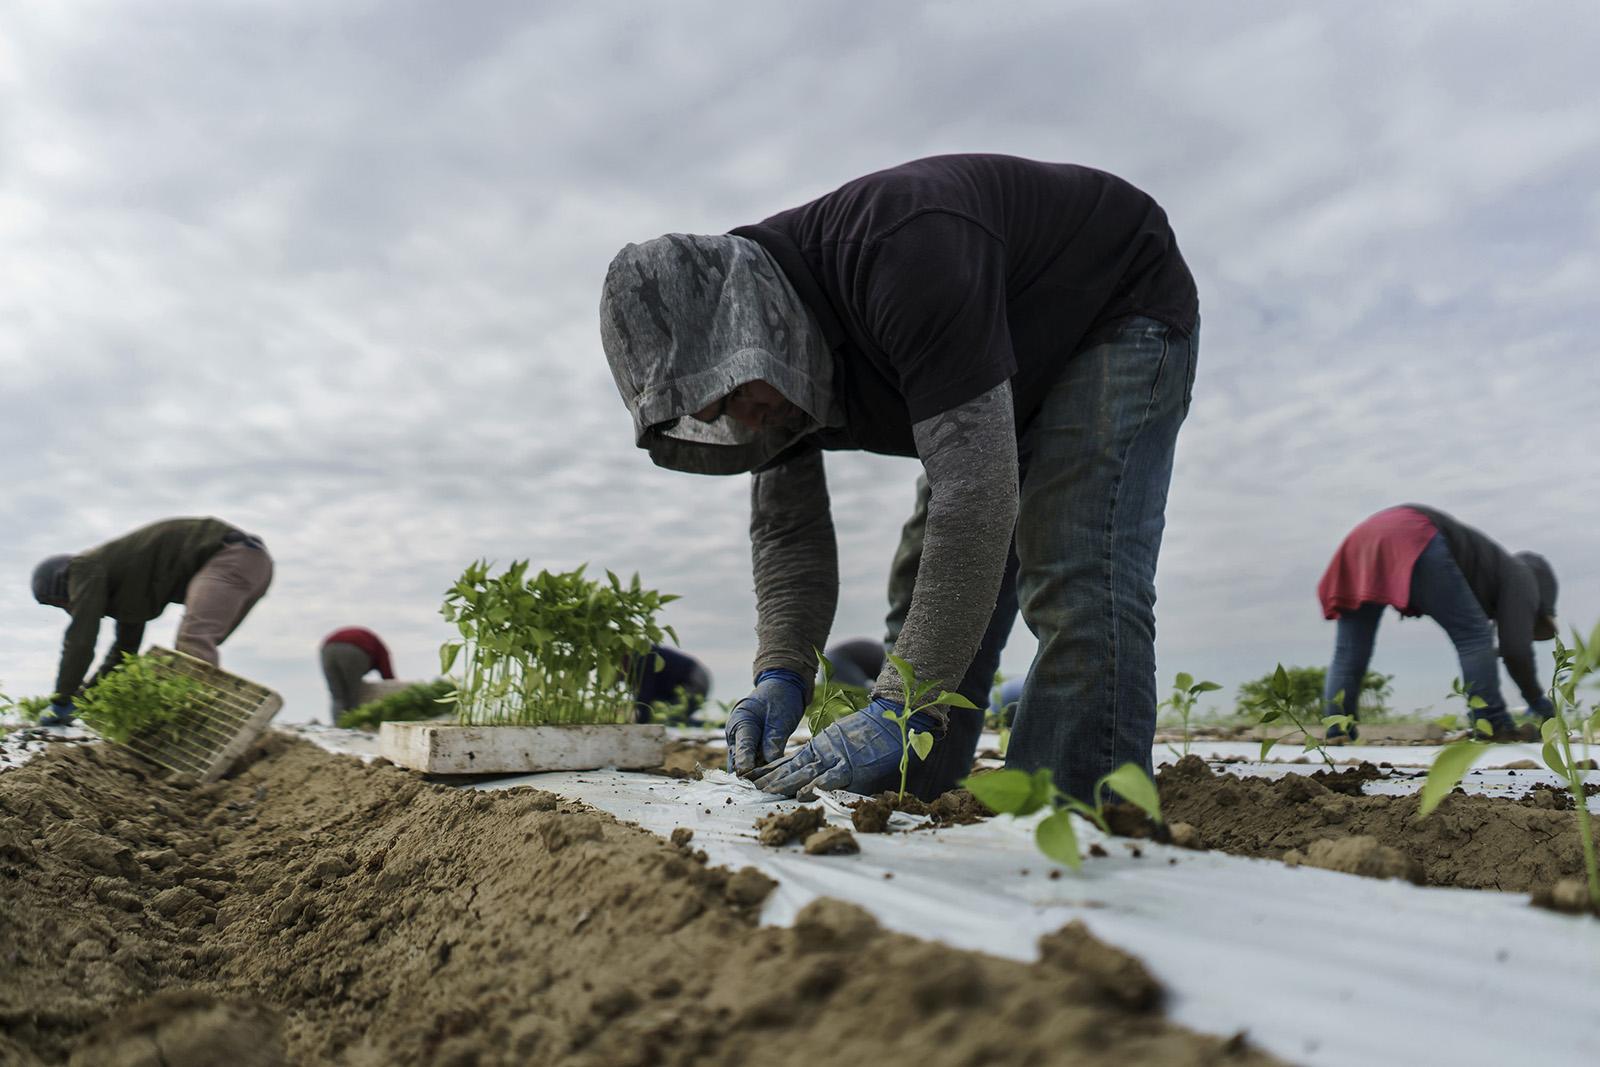 Migrant+farm+workers+transplant+jalapeno+sprouts+from+trucks+into+the+soil+at+a+farm+on+March+7%2C+2018%2C+in+Lamont%2C+Calif.+Two+California+Democrats+filed+legislation+that+would+give+undocumented+immigrant+farmworkers+and+their+families+a+path+to+legal+resident+status+and+possibly+U.S.+citizenship.+%28Marcus+Yam%2FLos+Angeles+Times%2FTNS%29